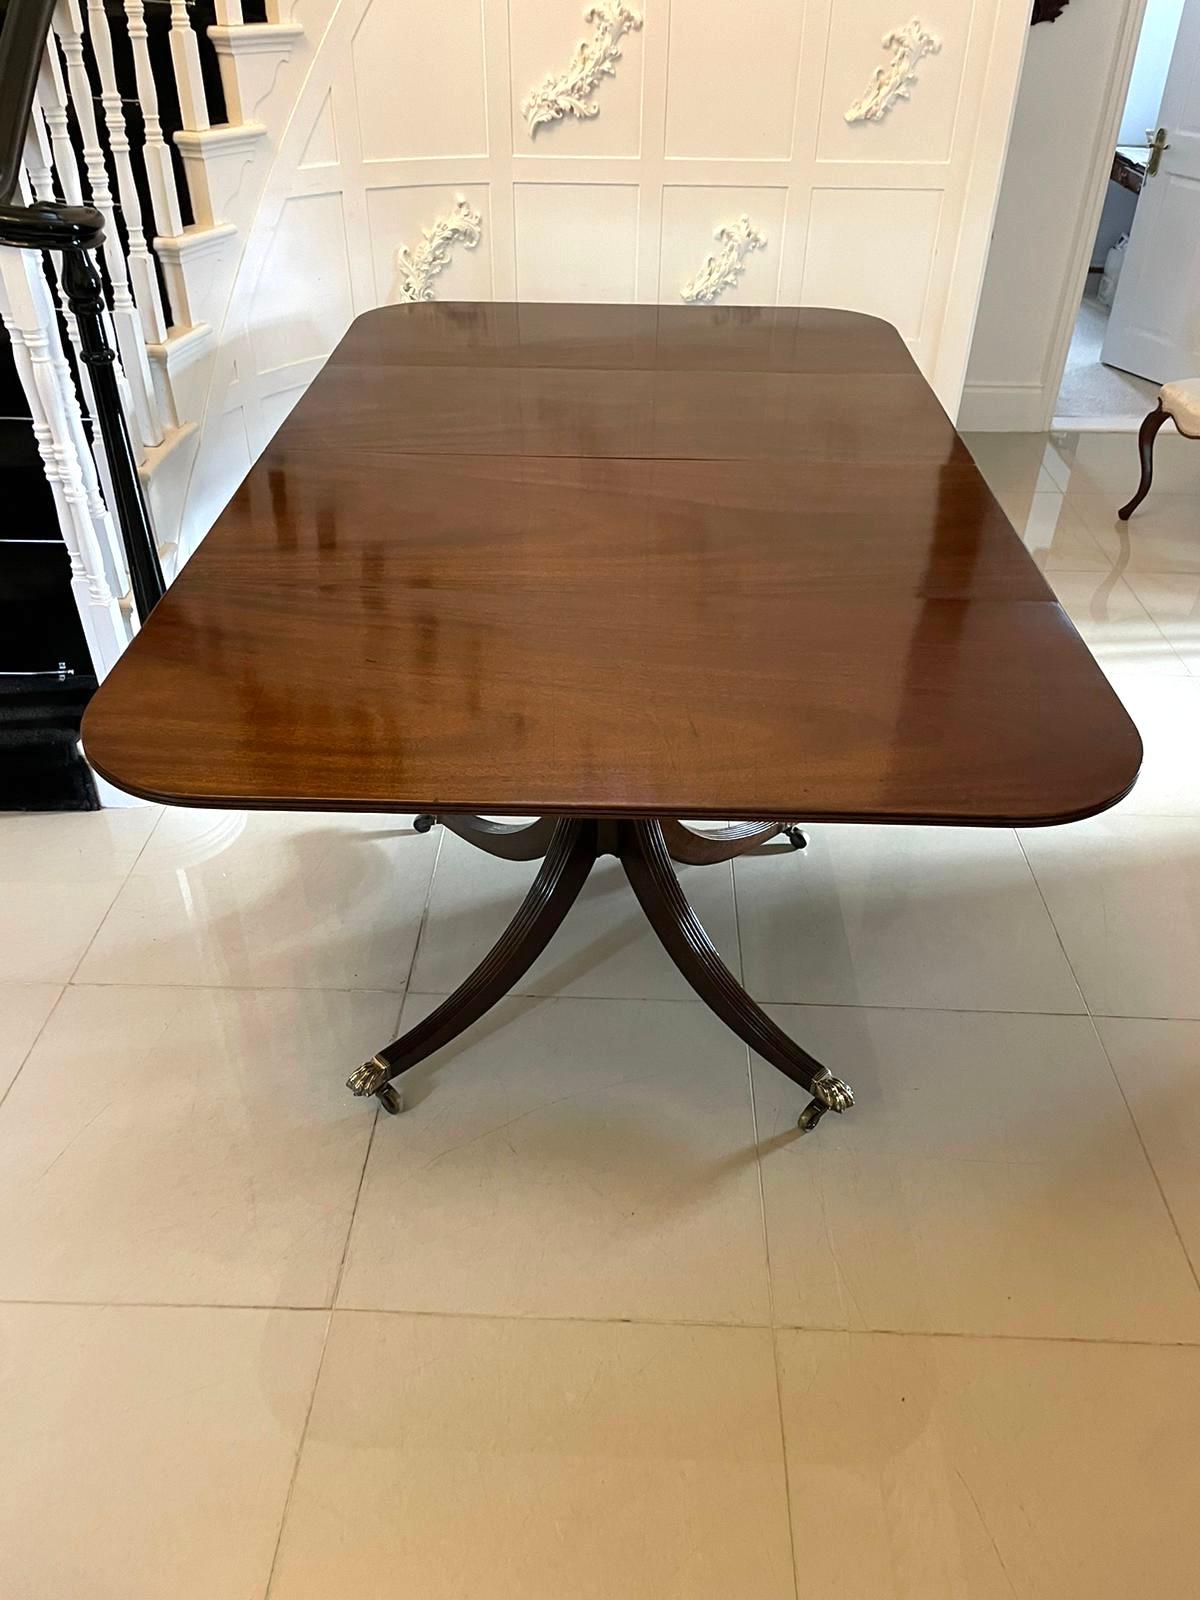 Outstanding antique Victorian 14 seater figured mahogany dining table having an exceptional solid figured mahogany top with a reeded edge, two original extra leaves and supported by two elegant turned mahogany pedestal columns standing on splayed